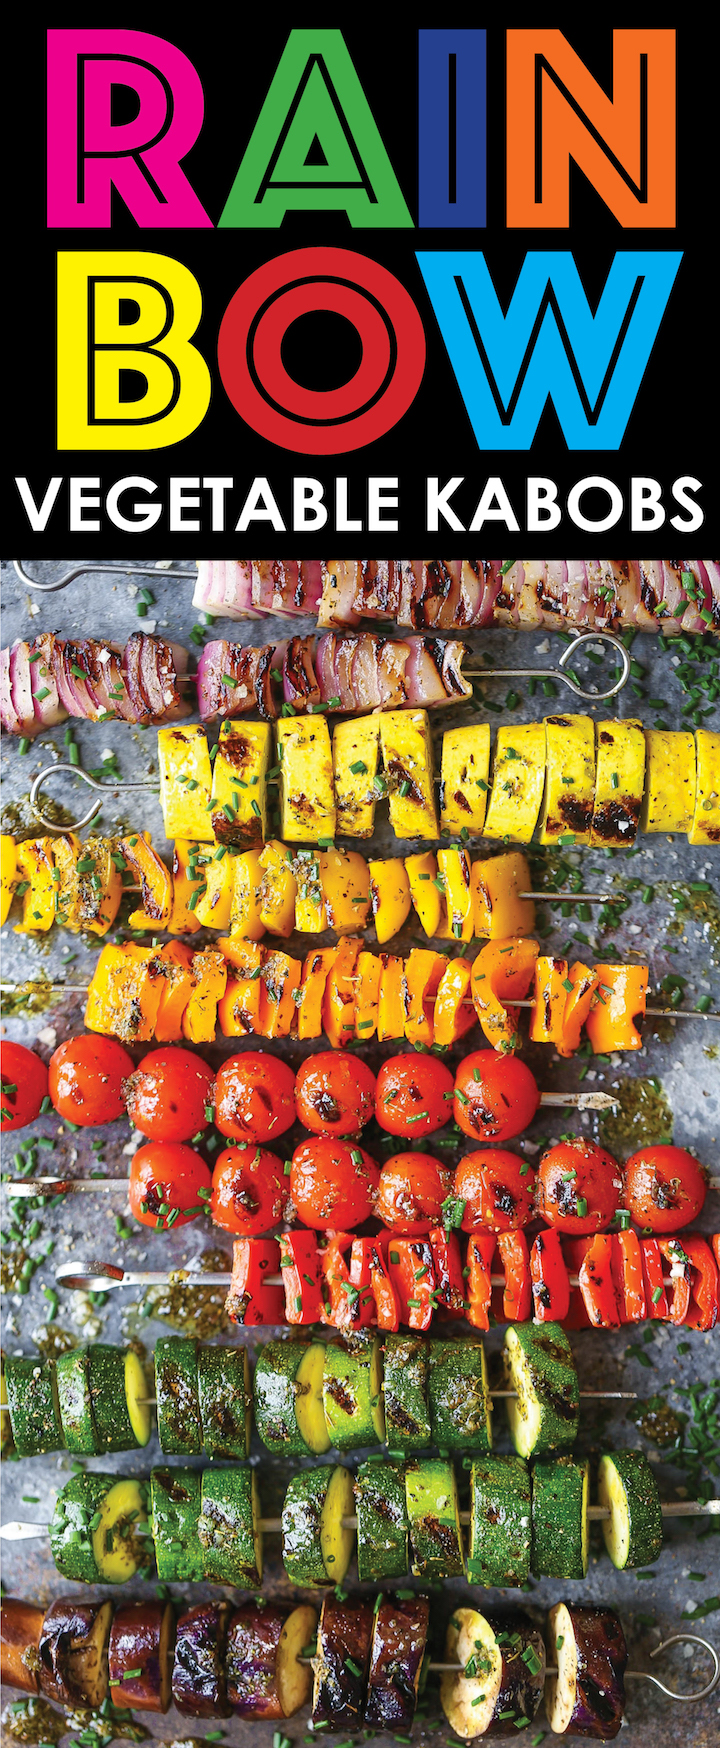 Rainbow Vegetable Kabobs - With a simple marinade using pantry ingredients, these kabobs are so colorful, vibrant, flavorful and sure to please everyone!